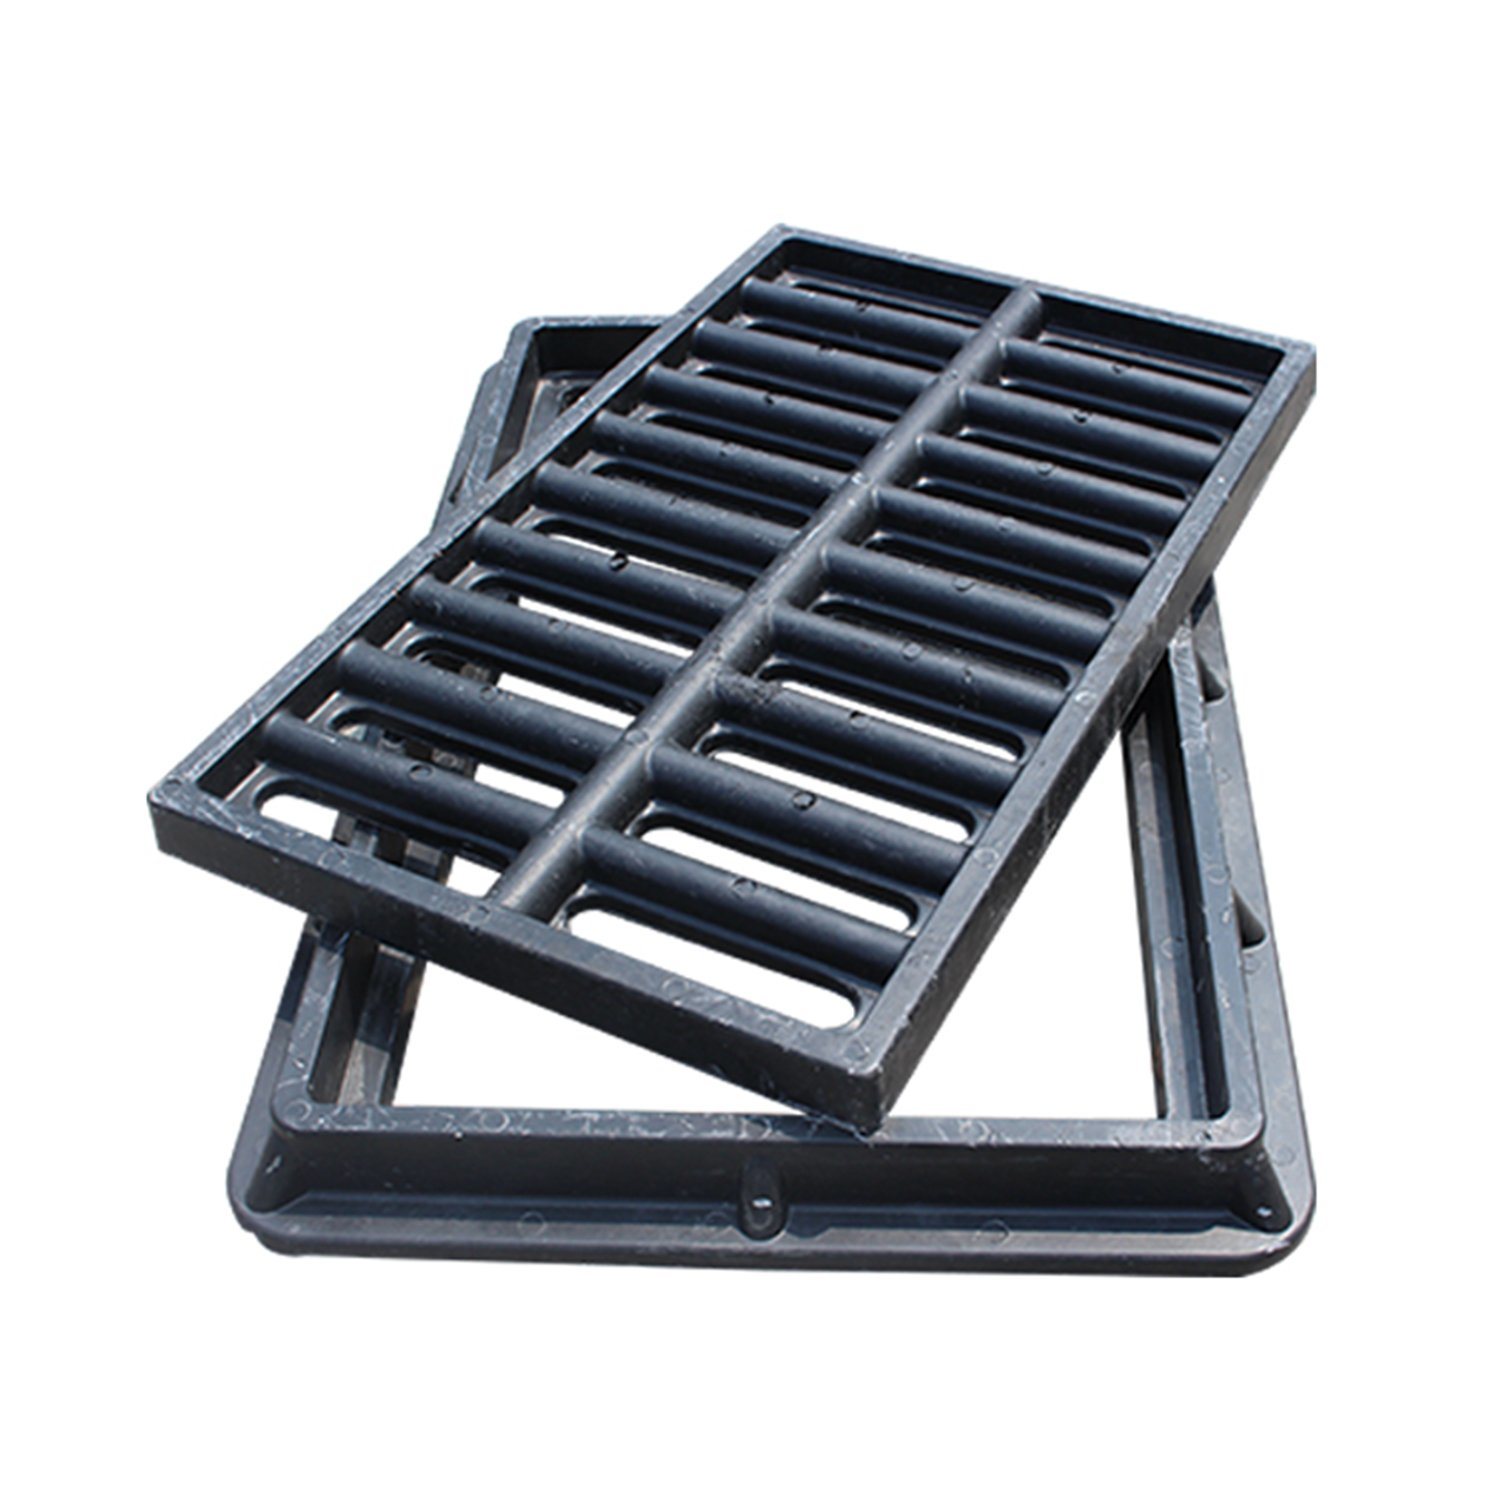 Velit INCILE Grate fossa Driveway Iron Exhaurire Cover Gully Grates Featured Image